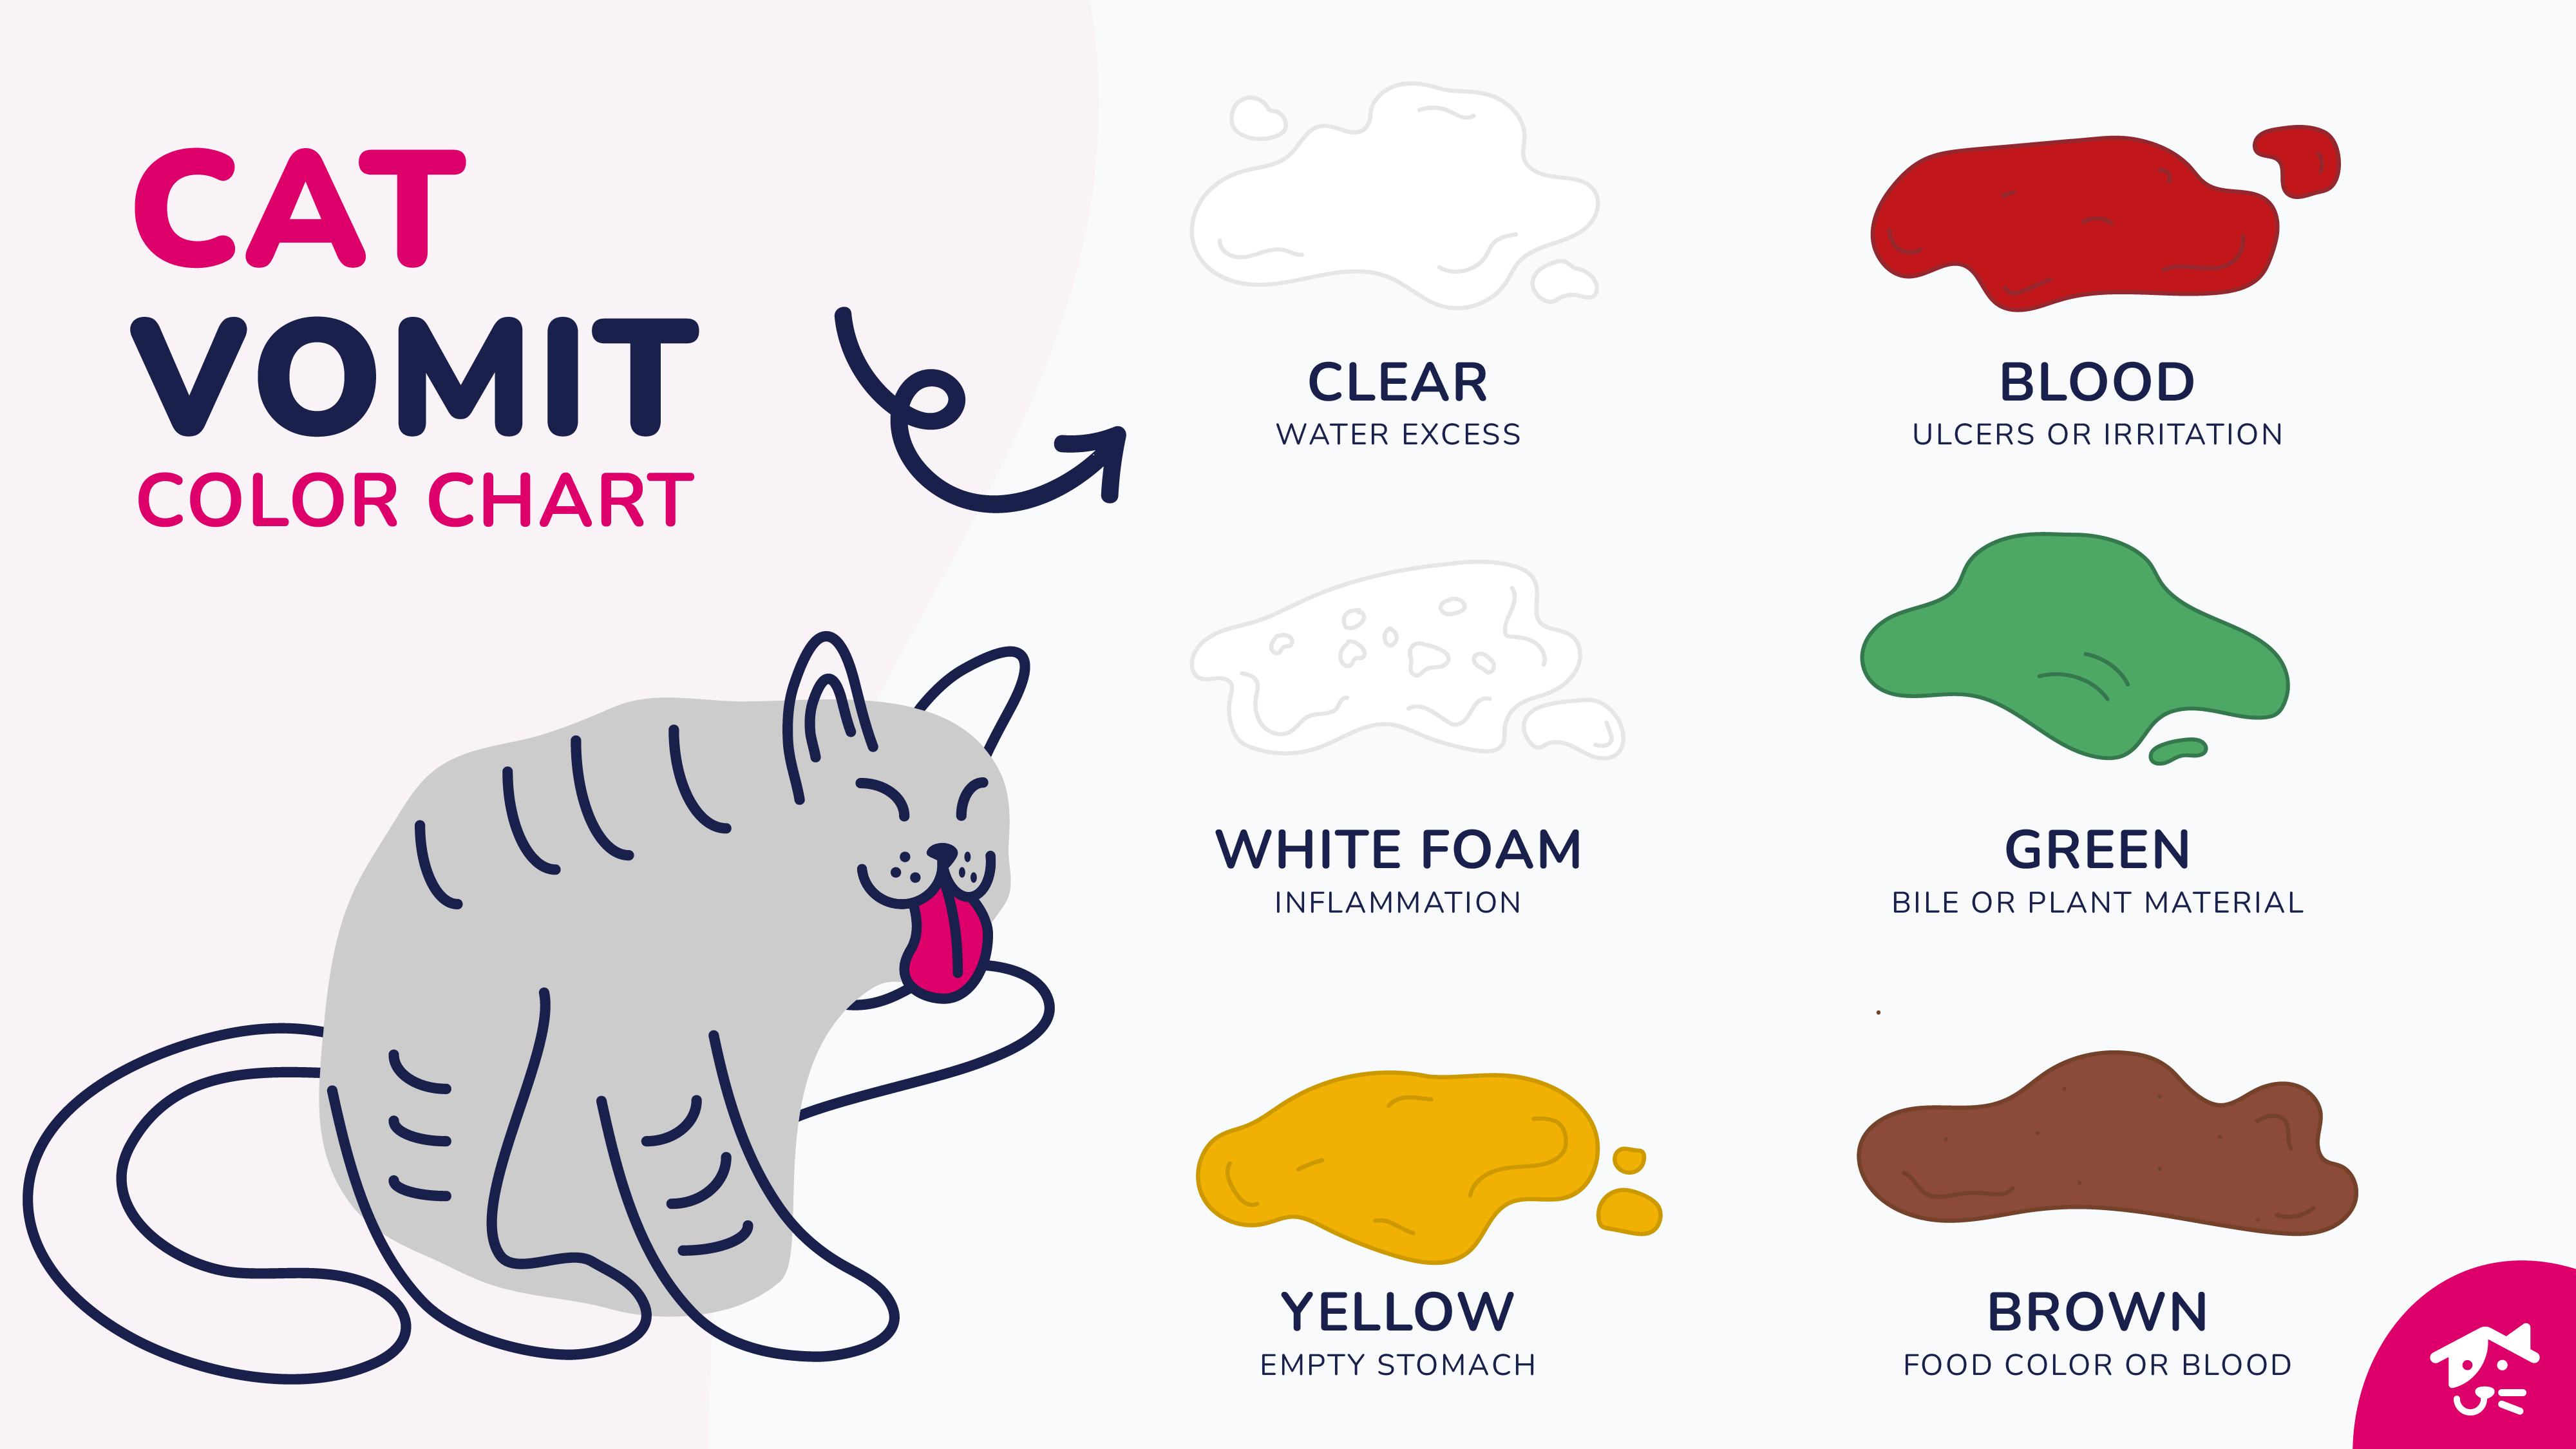 An illustrated chart showing the different colors and meanings of cat vomit.